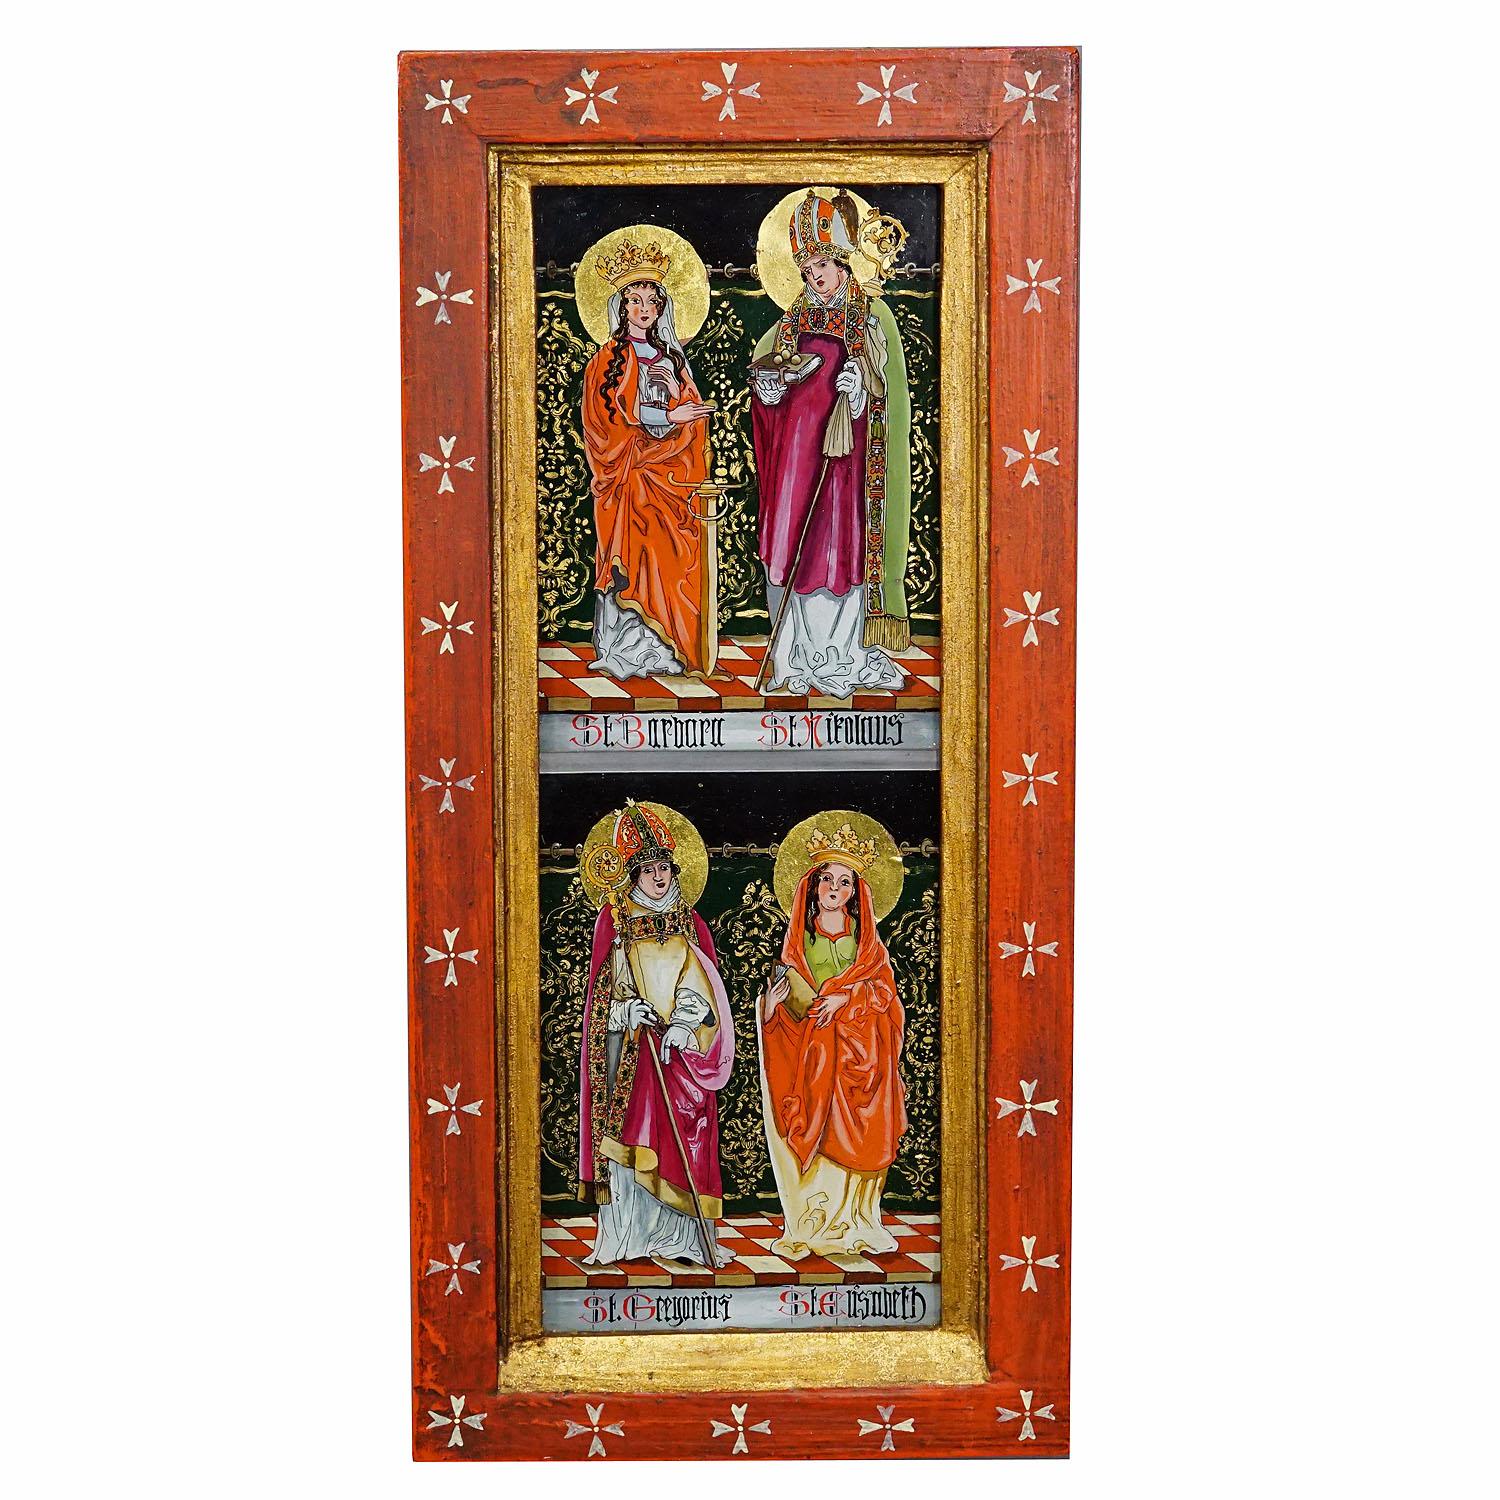 Antique Oil Painting With Four Saints, Germany ca. 1920s

A great antique painting depicting the saints St. Elisabeth, St. Gregorius, St. Nikolaus and St. Barbara. Handpainted with enamel paint in Germany ca. 1920s. Framed behind glass in a wooden